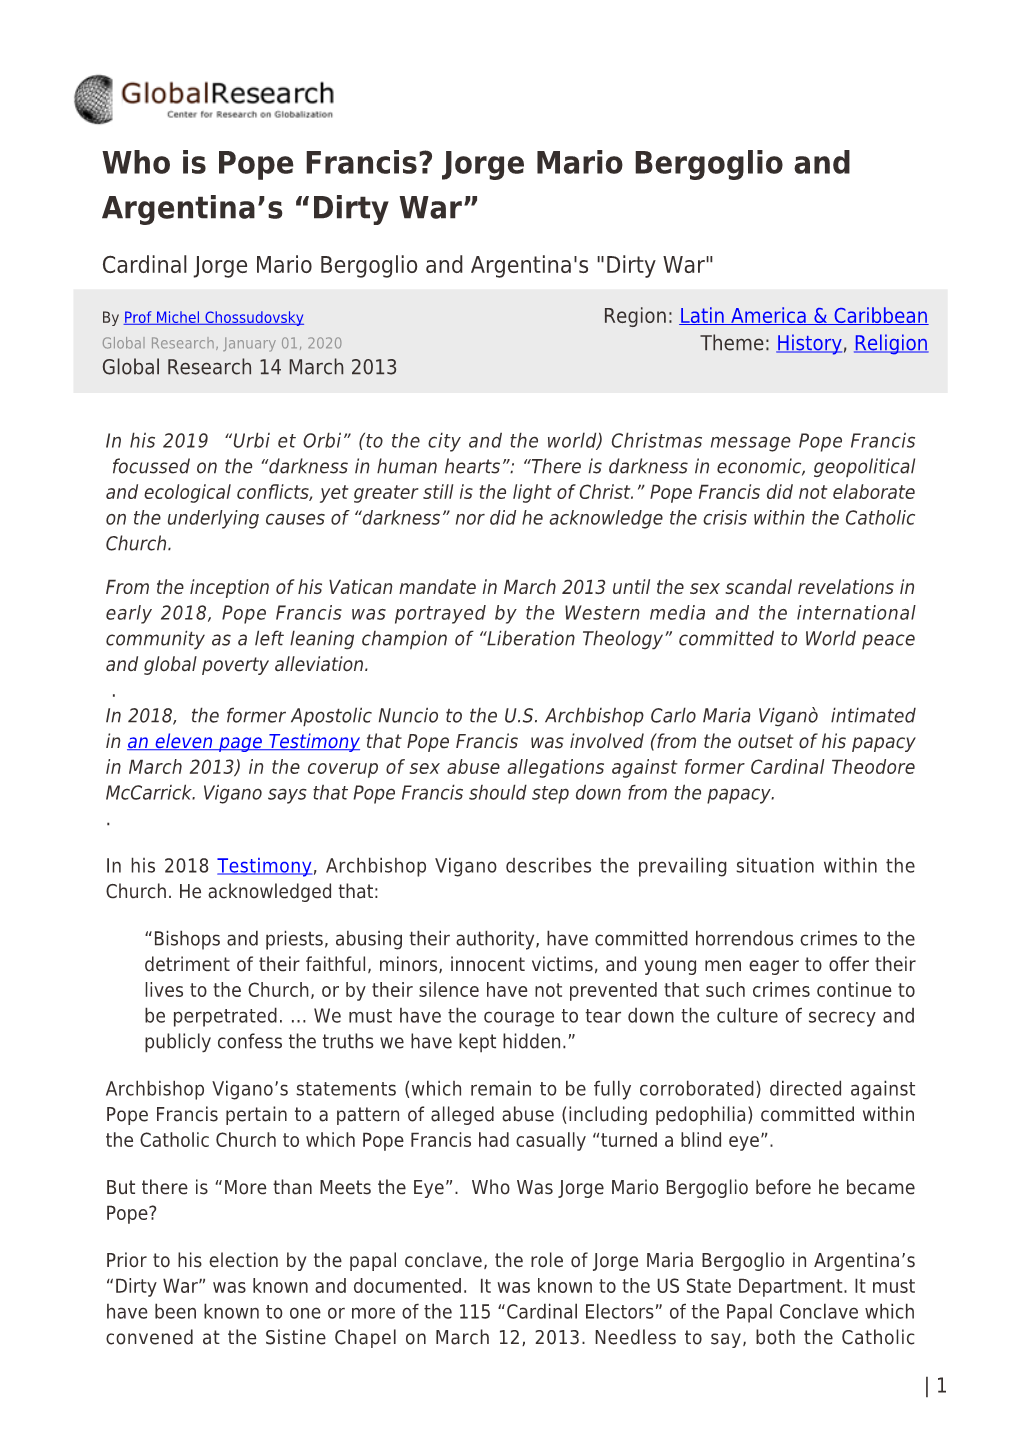 Who Is Pope Francis? Jorge Mario Bergoglio and Argentina’S “Dirty War”